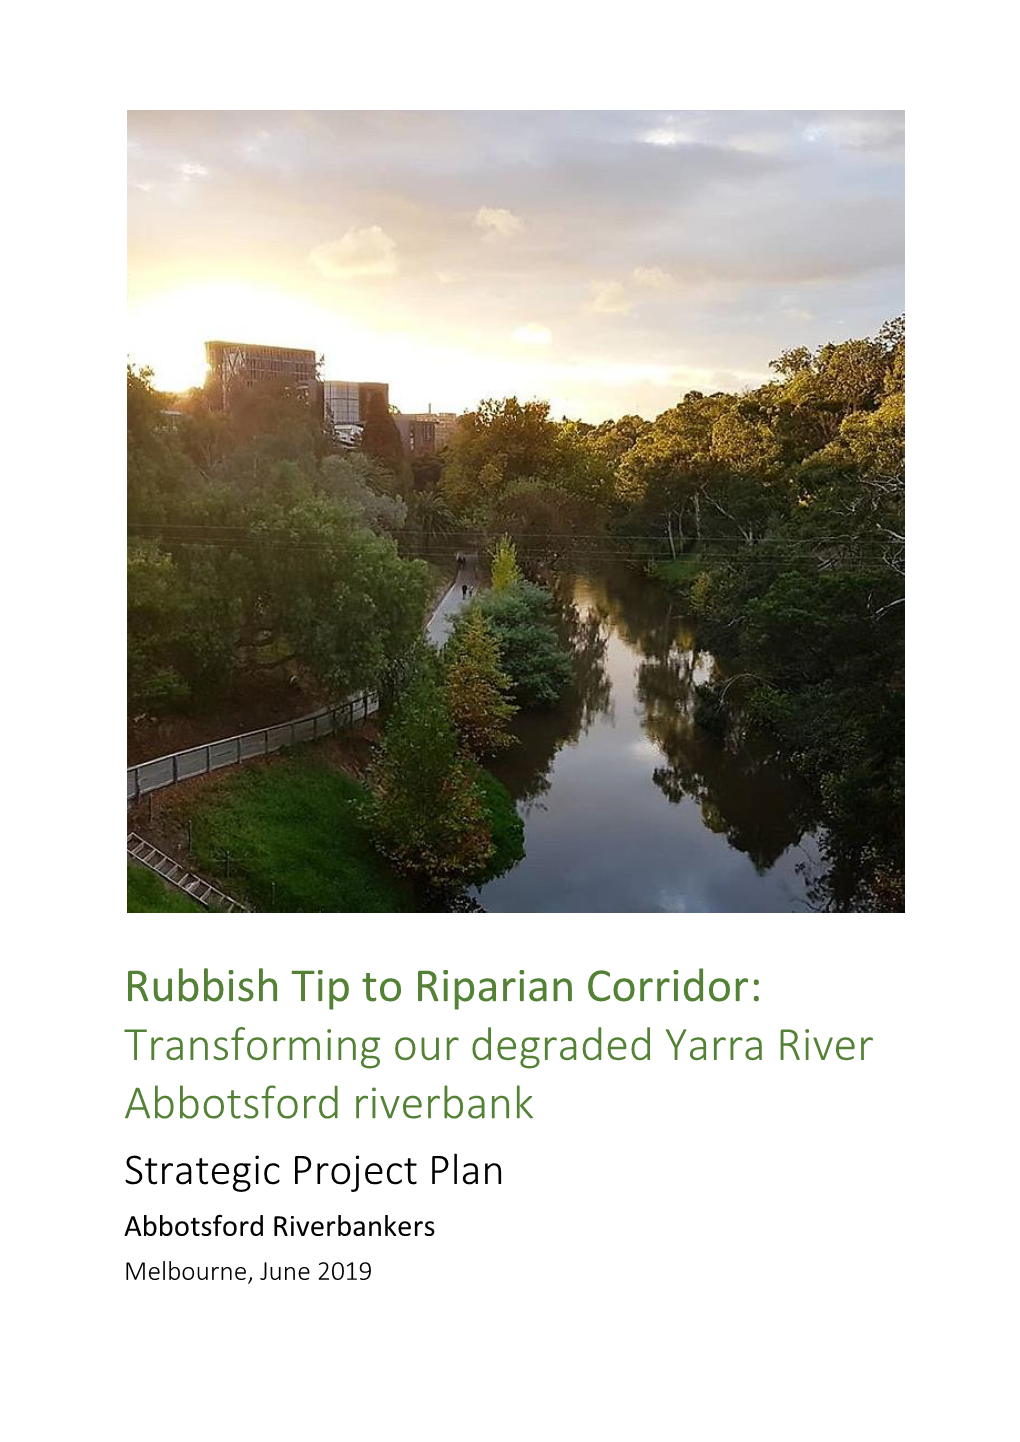 Transforming Our Degraded Yarra River Abbotsford Riverbank Strategic Project Plan Abbotsford Riverbankers Melbourne, June 2019